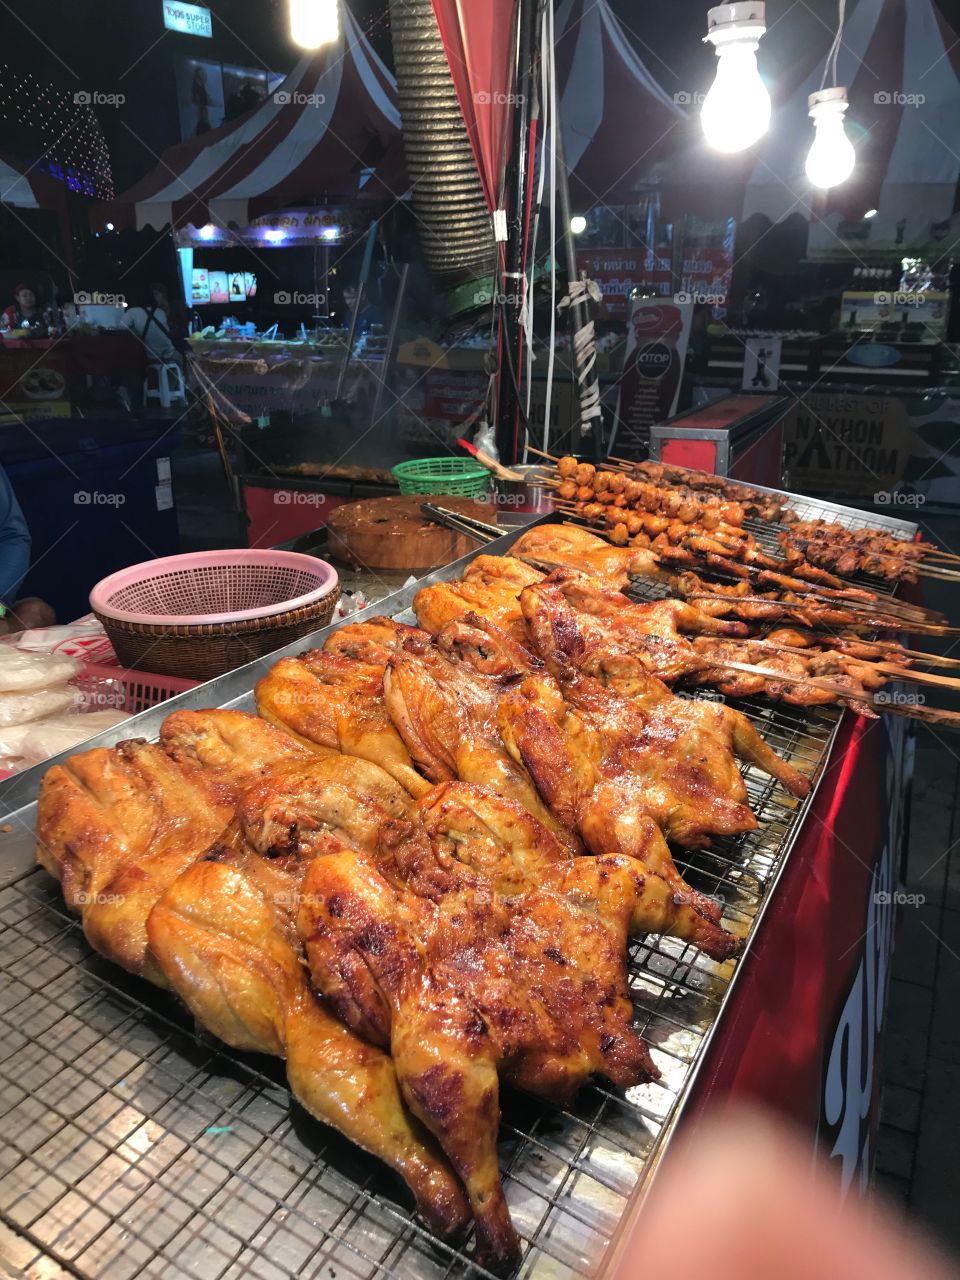 Grilled chickens in the market